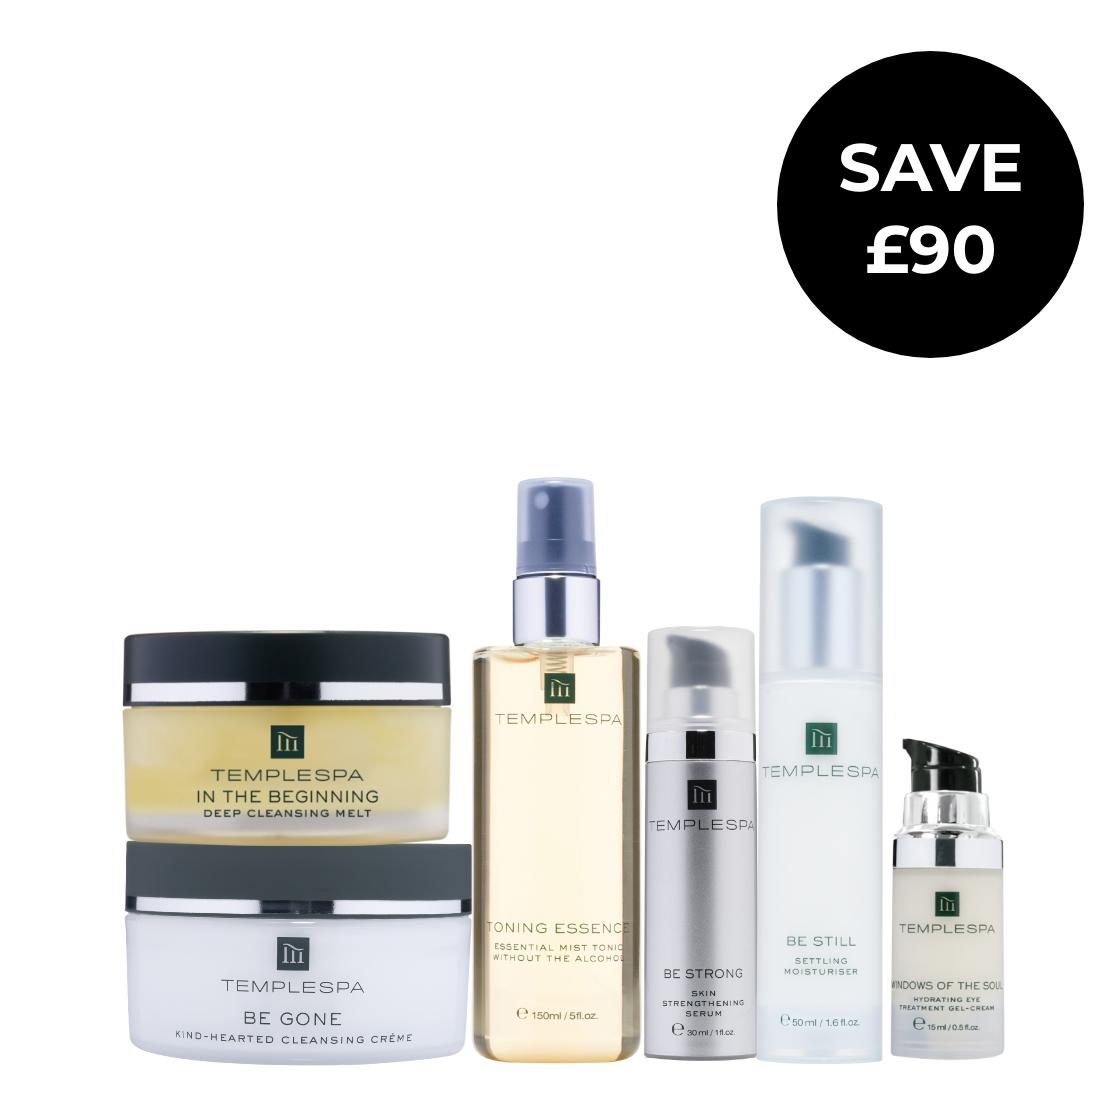 Your daily skincare needs covered with extra TLC - SKIN SAVIOUR PLUS